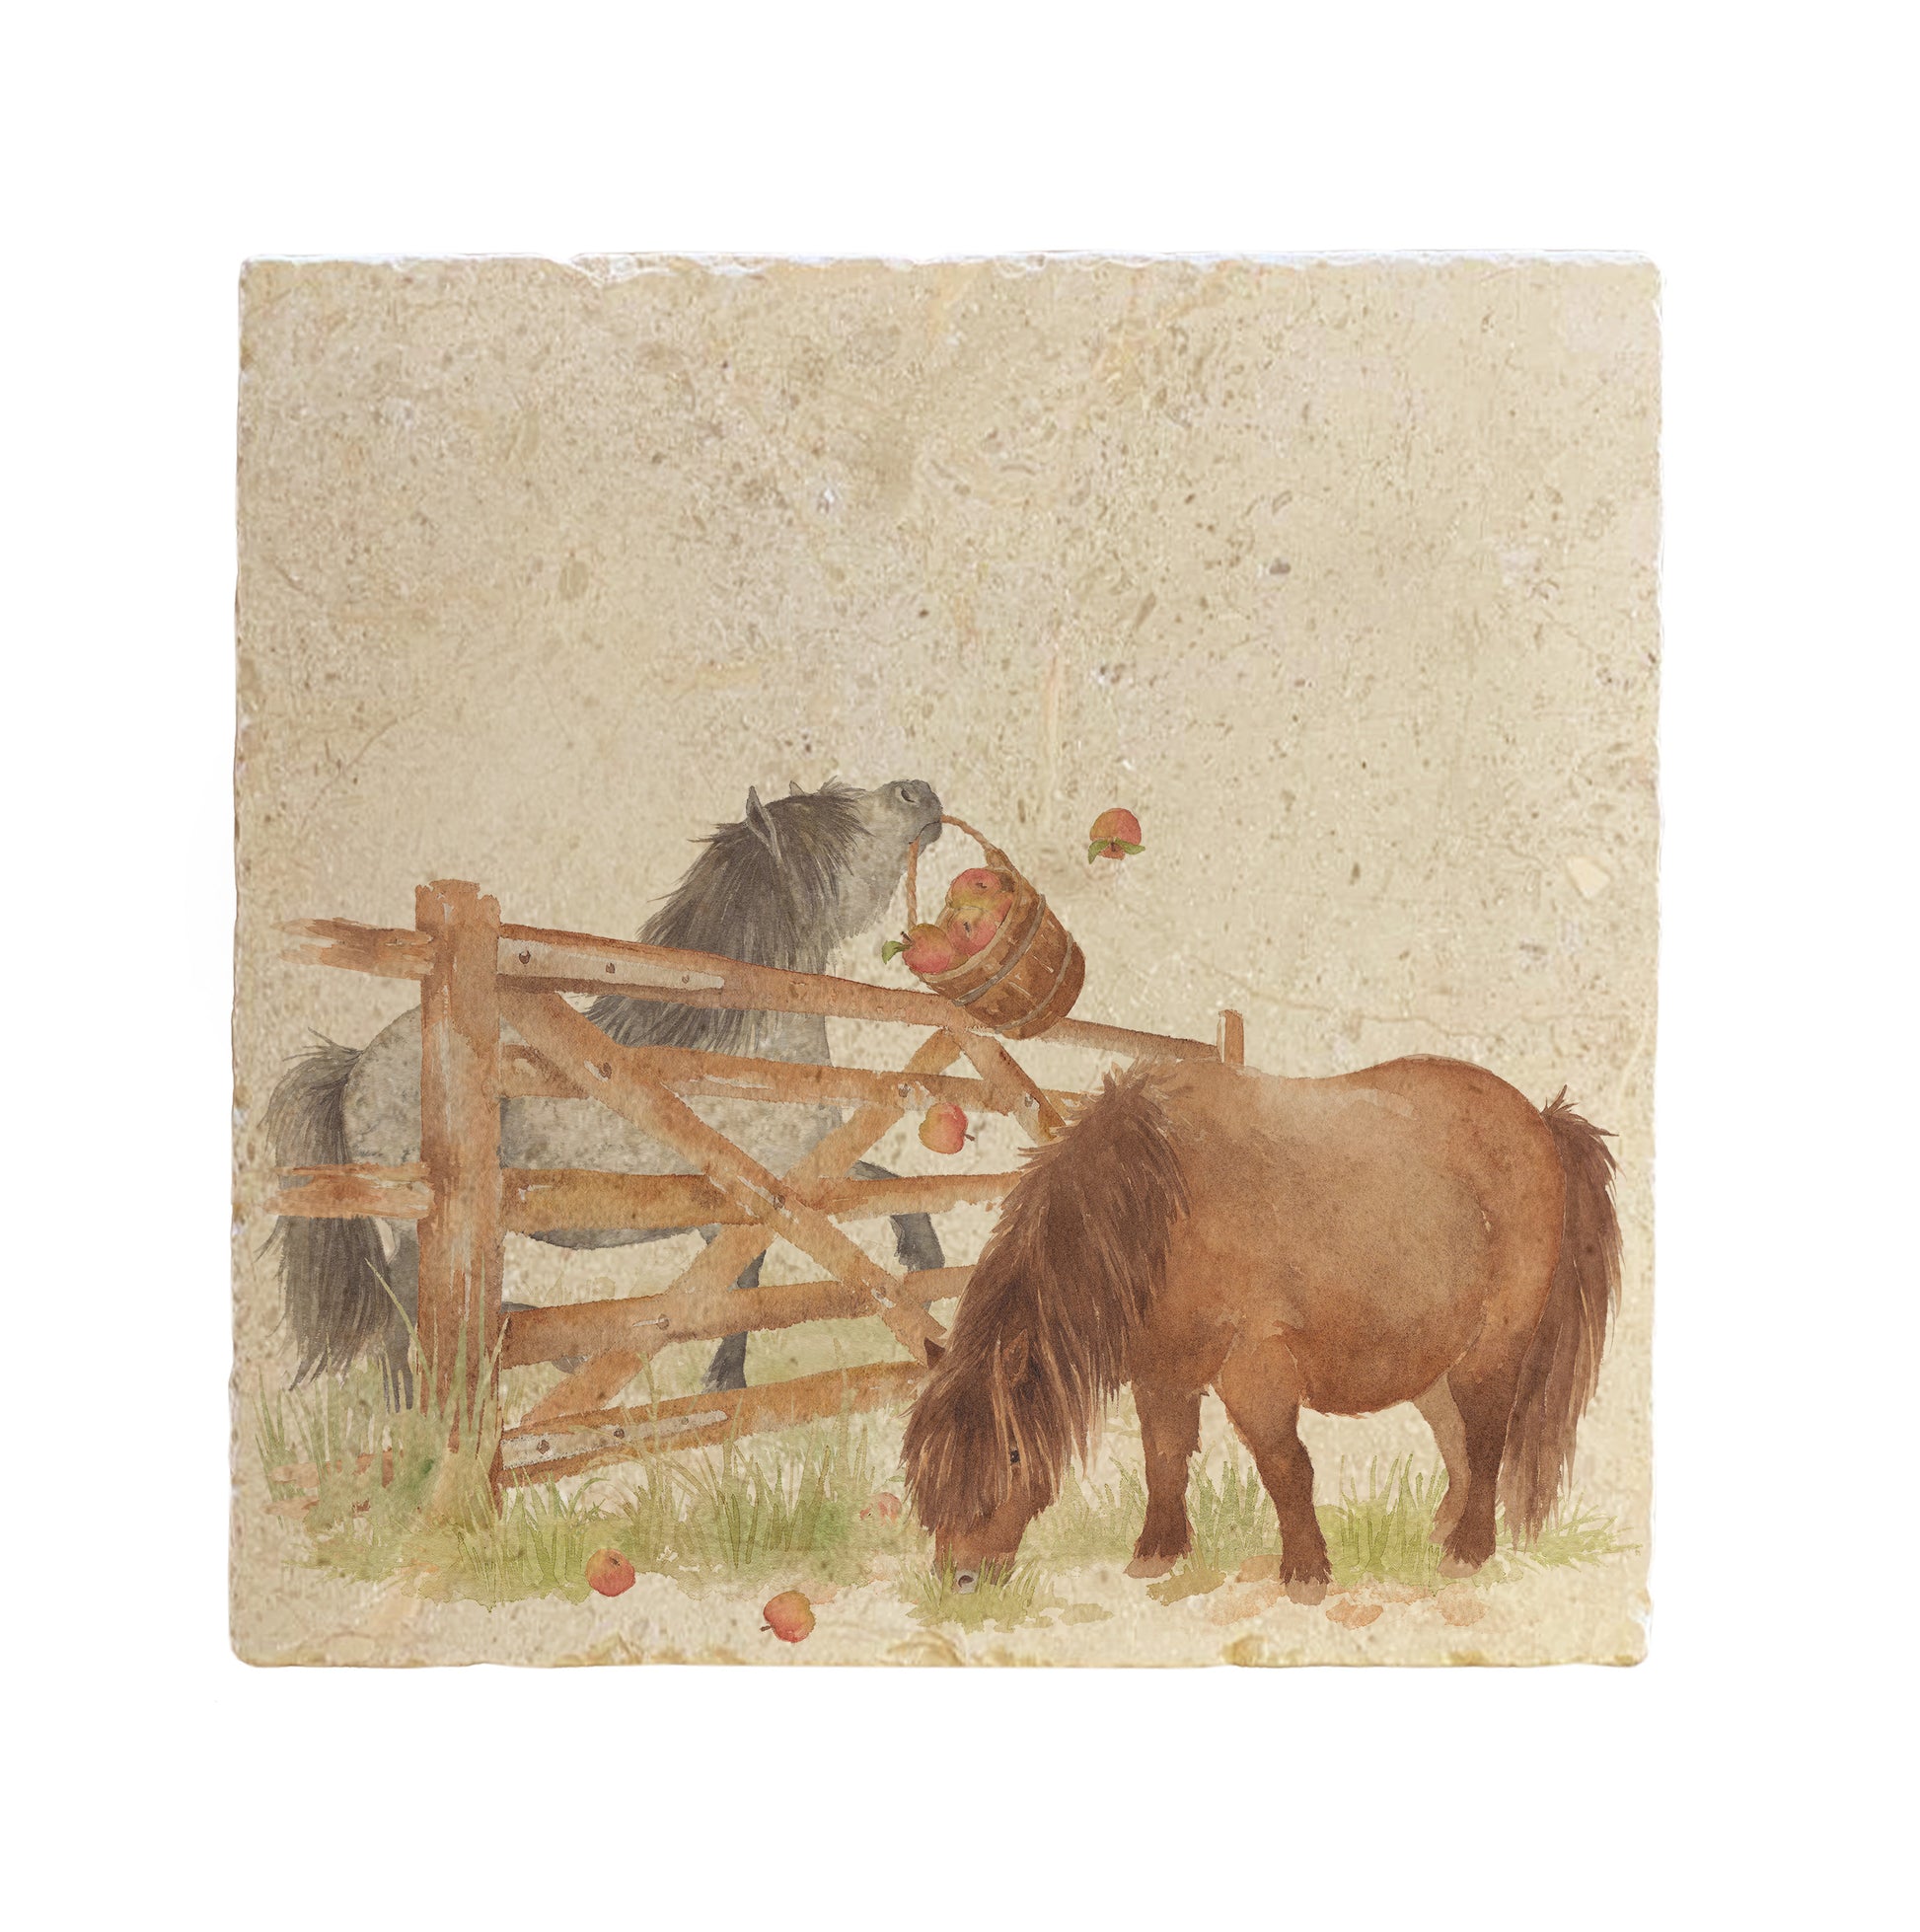 A large square multipurpose marble platter, featuring a watercolour design of two cheeky Shetland ponies stealing apples.